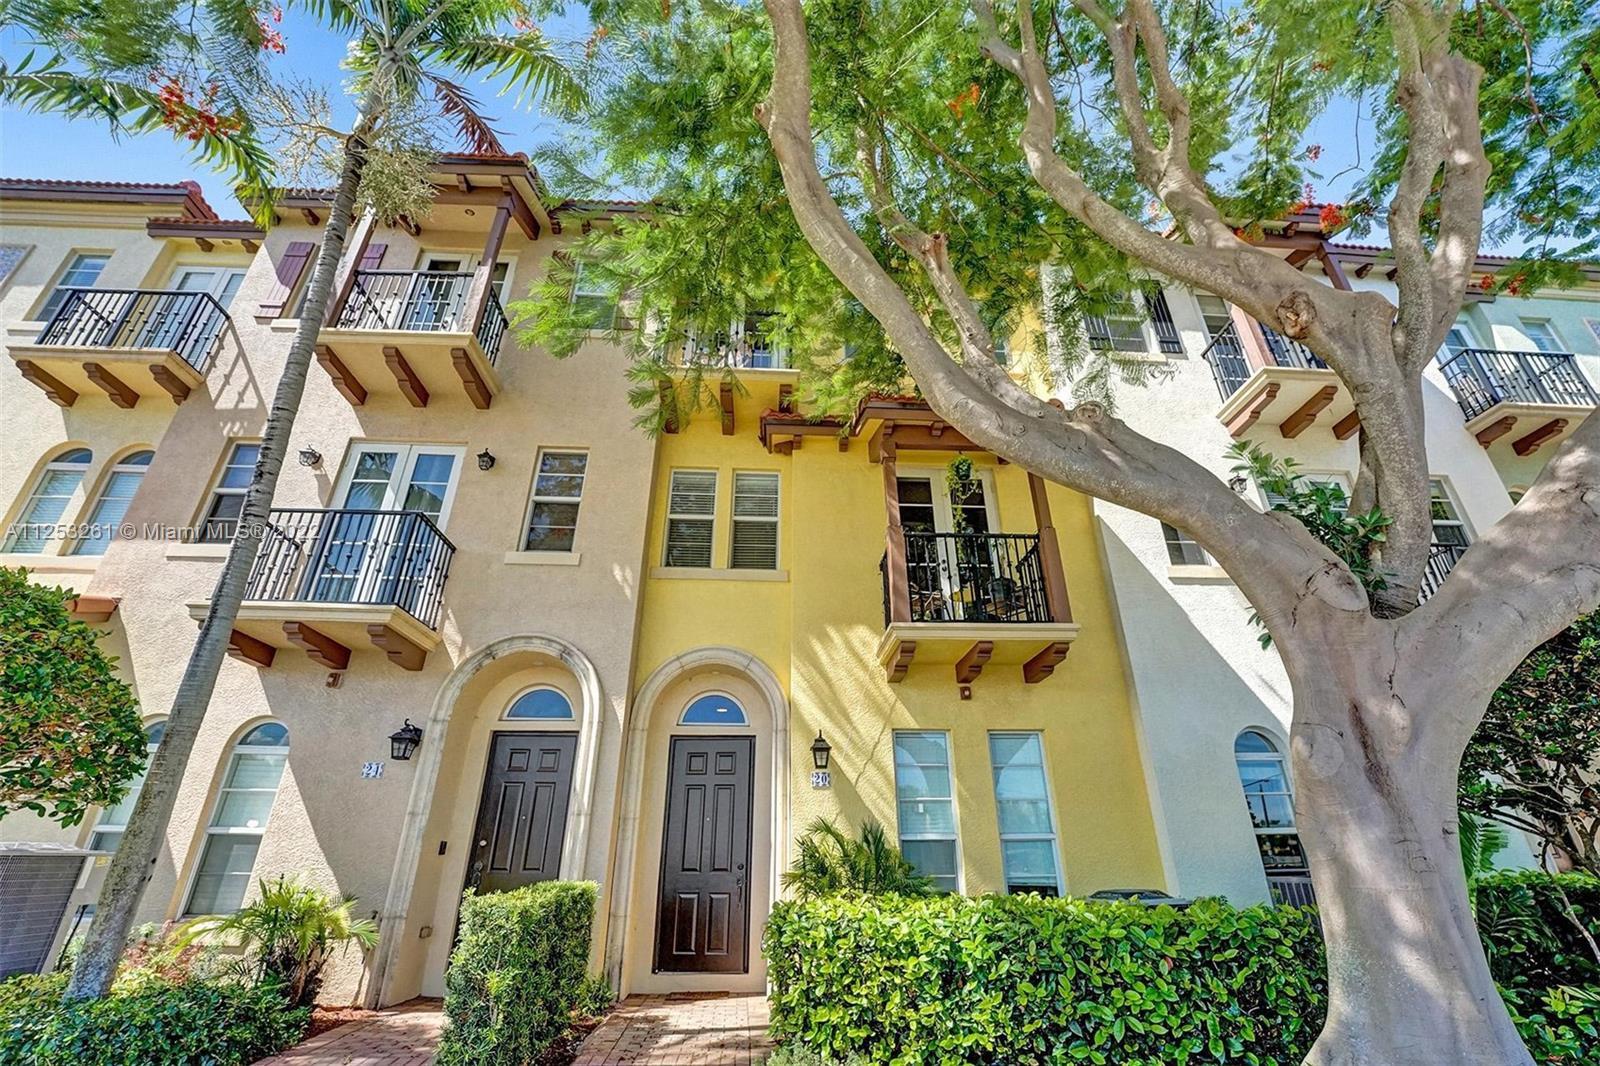 Welcome home to this stunning 3-story townhouse in a desired gated community. Ideally located in Eas